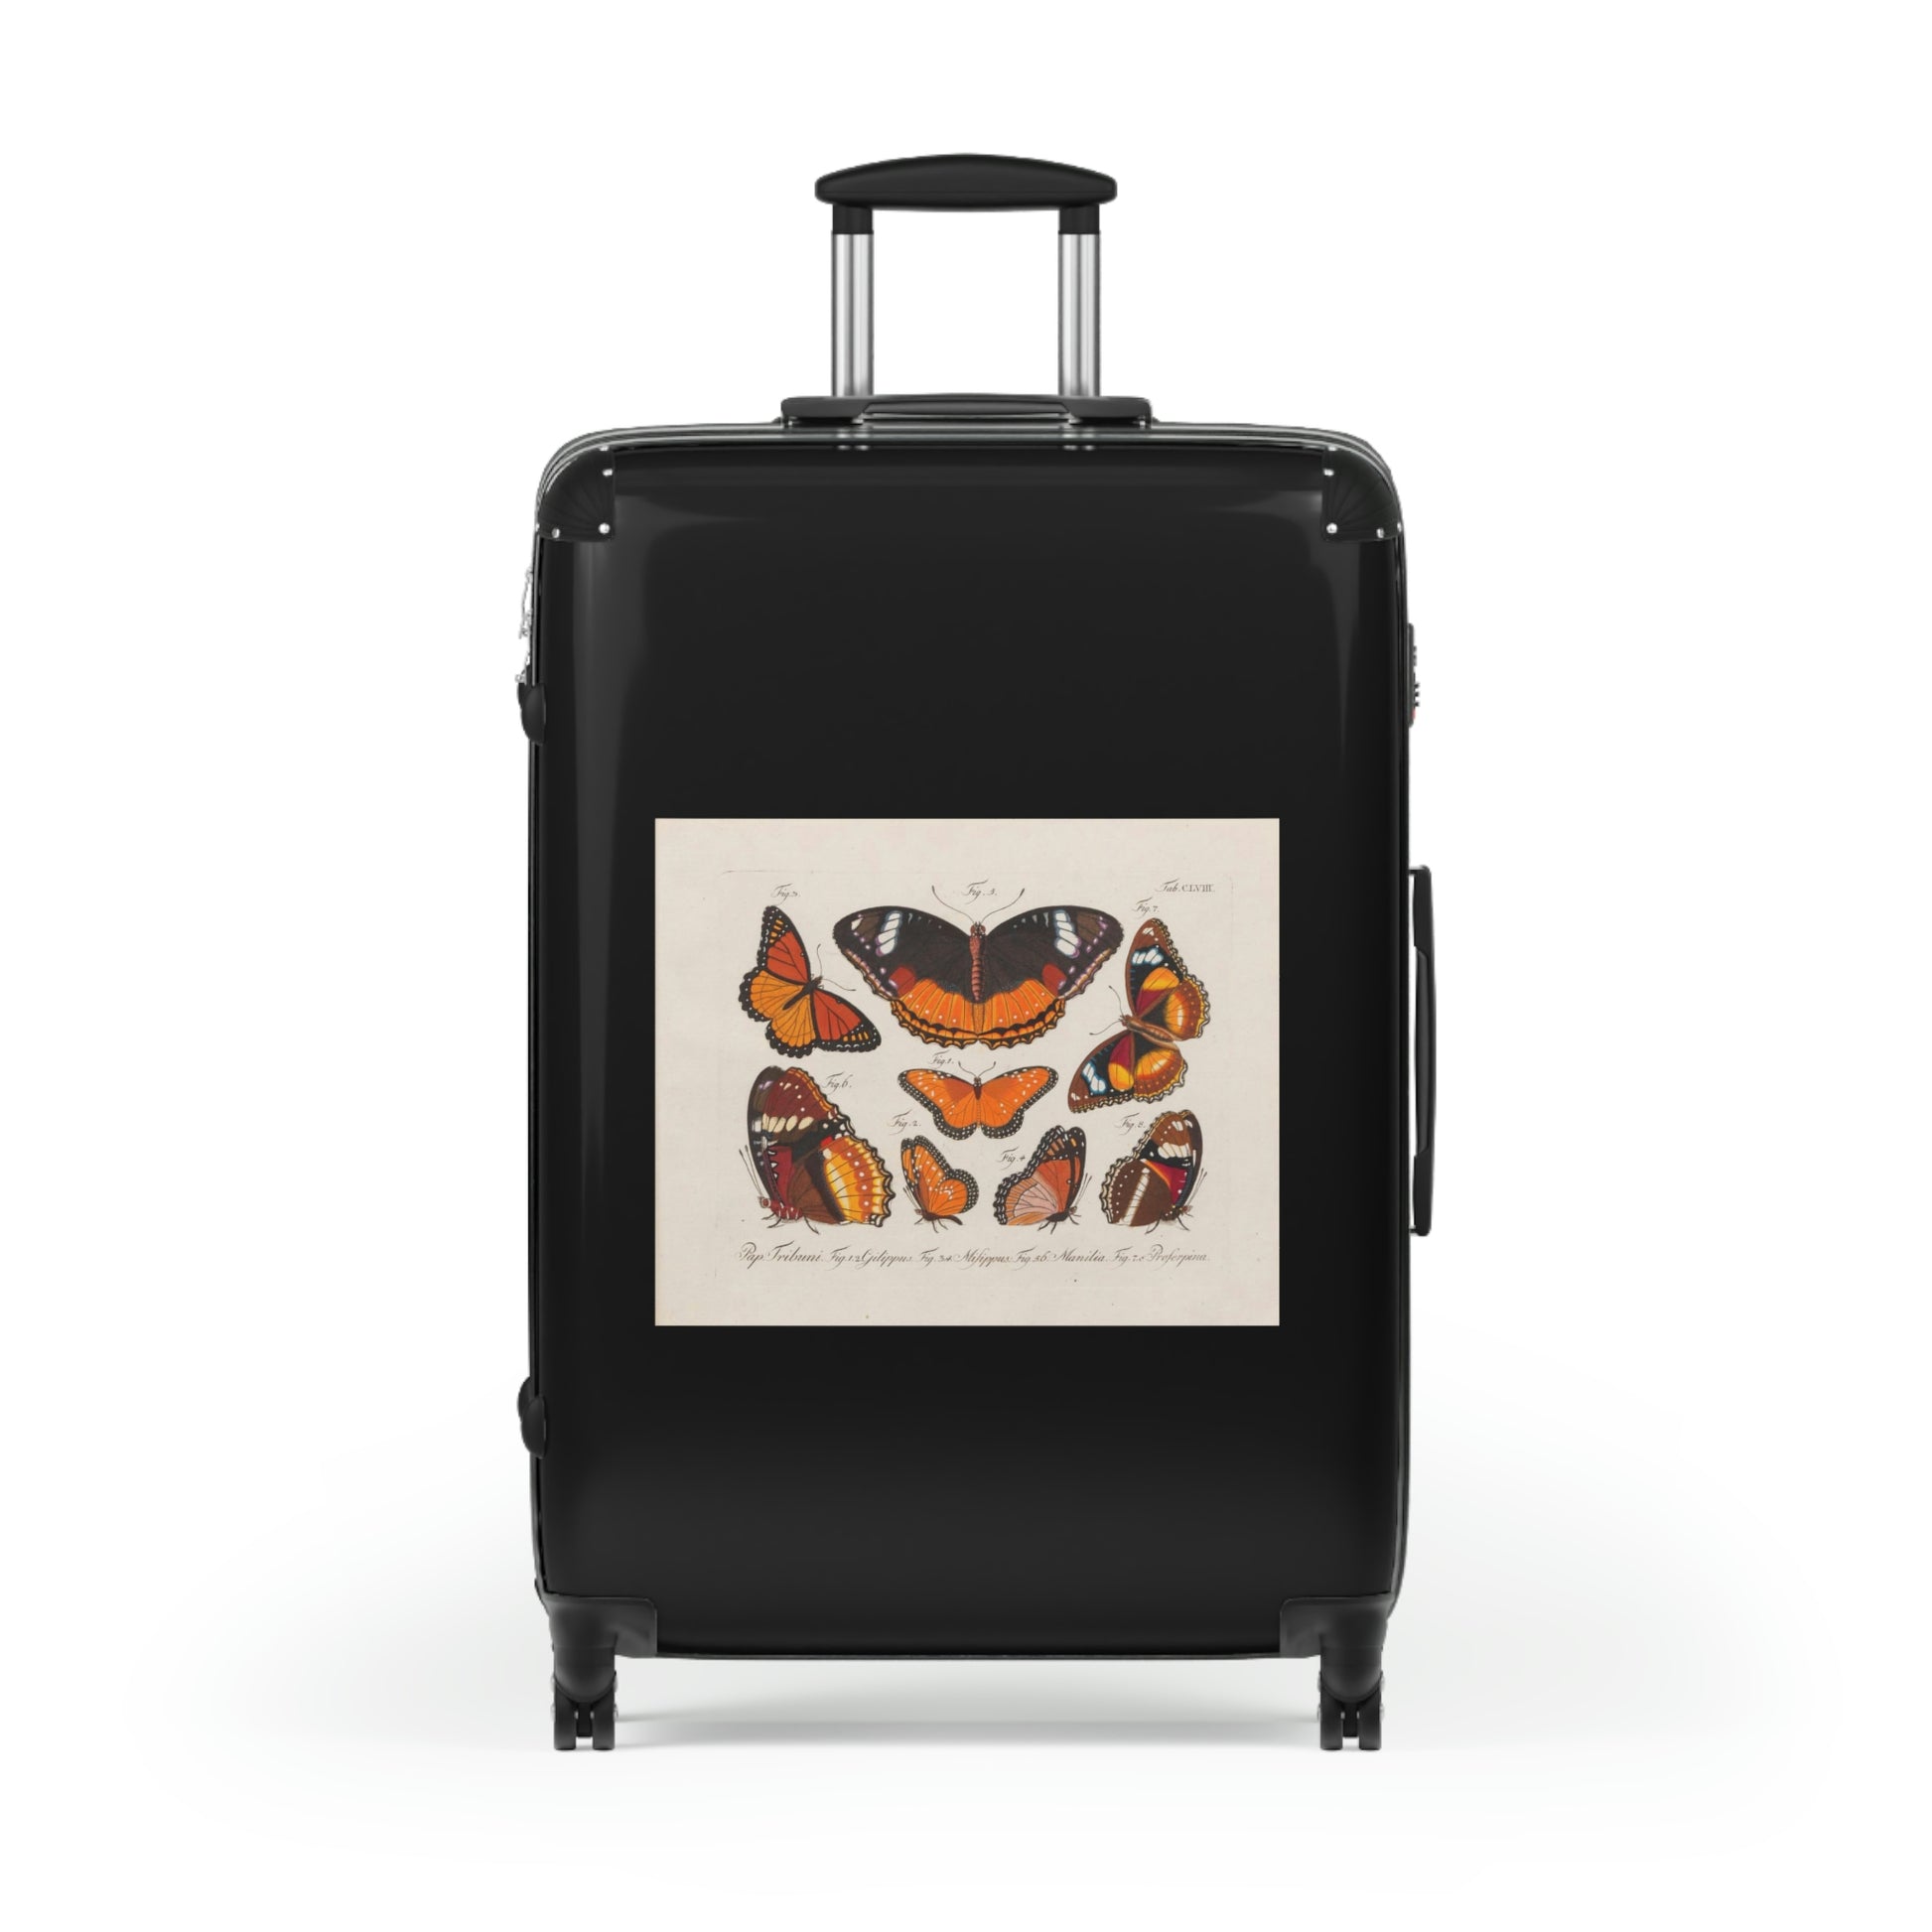 Getrott Butterflies Pap Tribuni Gilippus Milippus Manilia Proferpina Cabin Suitcase Rolling Luggage Inner Pockets Extended Storage Adjustable Telescopic Handle Inner Pockets Double wheeled Polycarbonate Hard-shell Built-in Lock